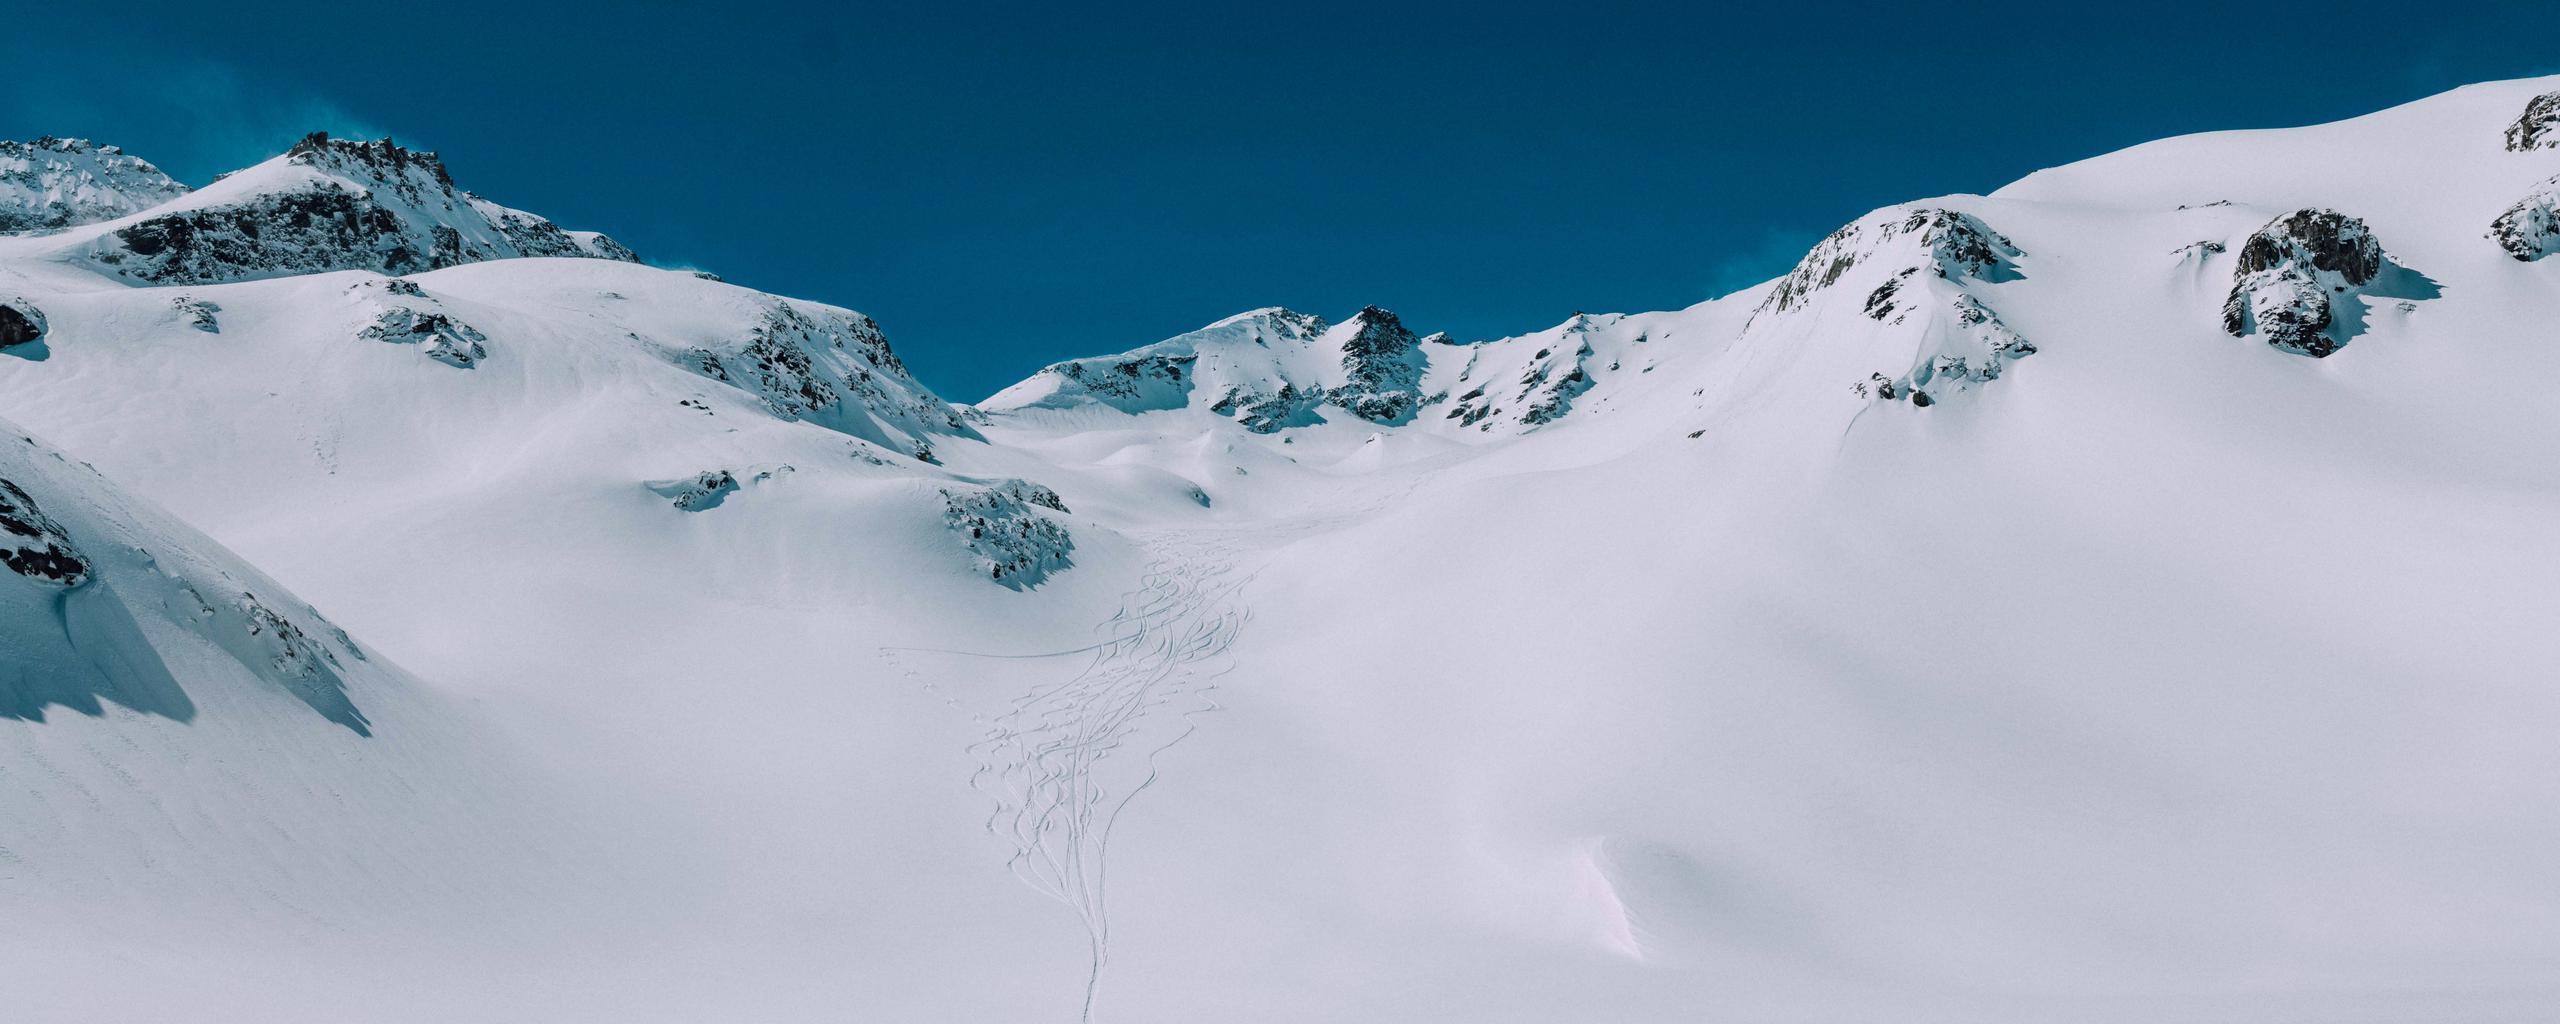 Snowy mountain landscape in French Alps with ski tracks